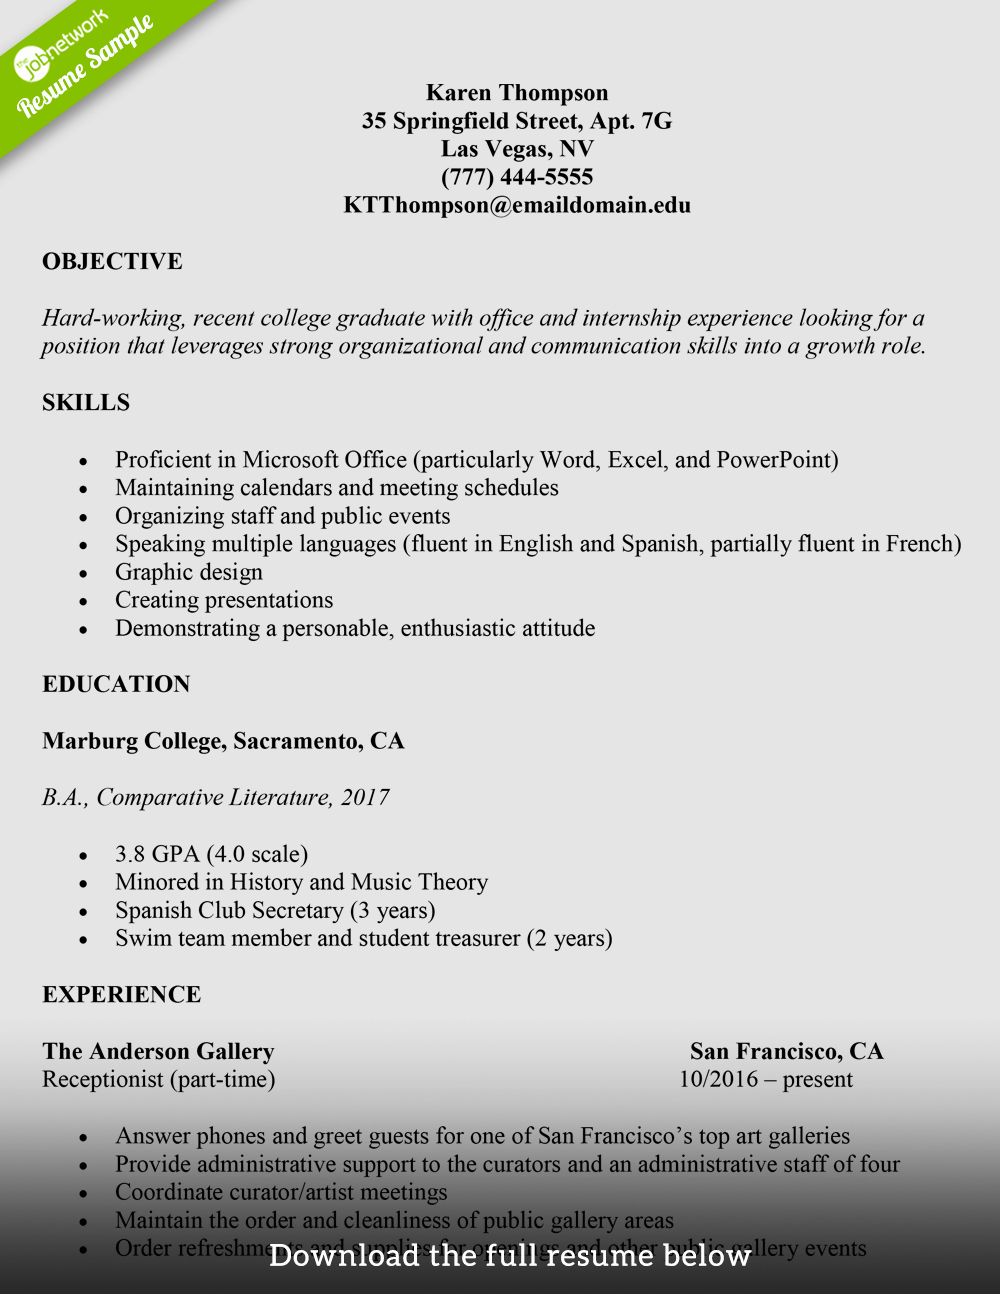 Cv Samples for Students Awesome How to Write A College Student Resume with Examples